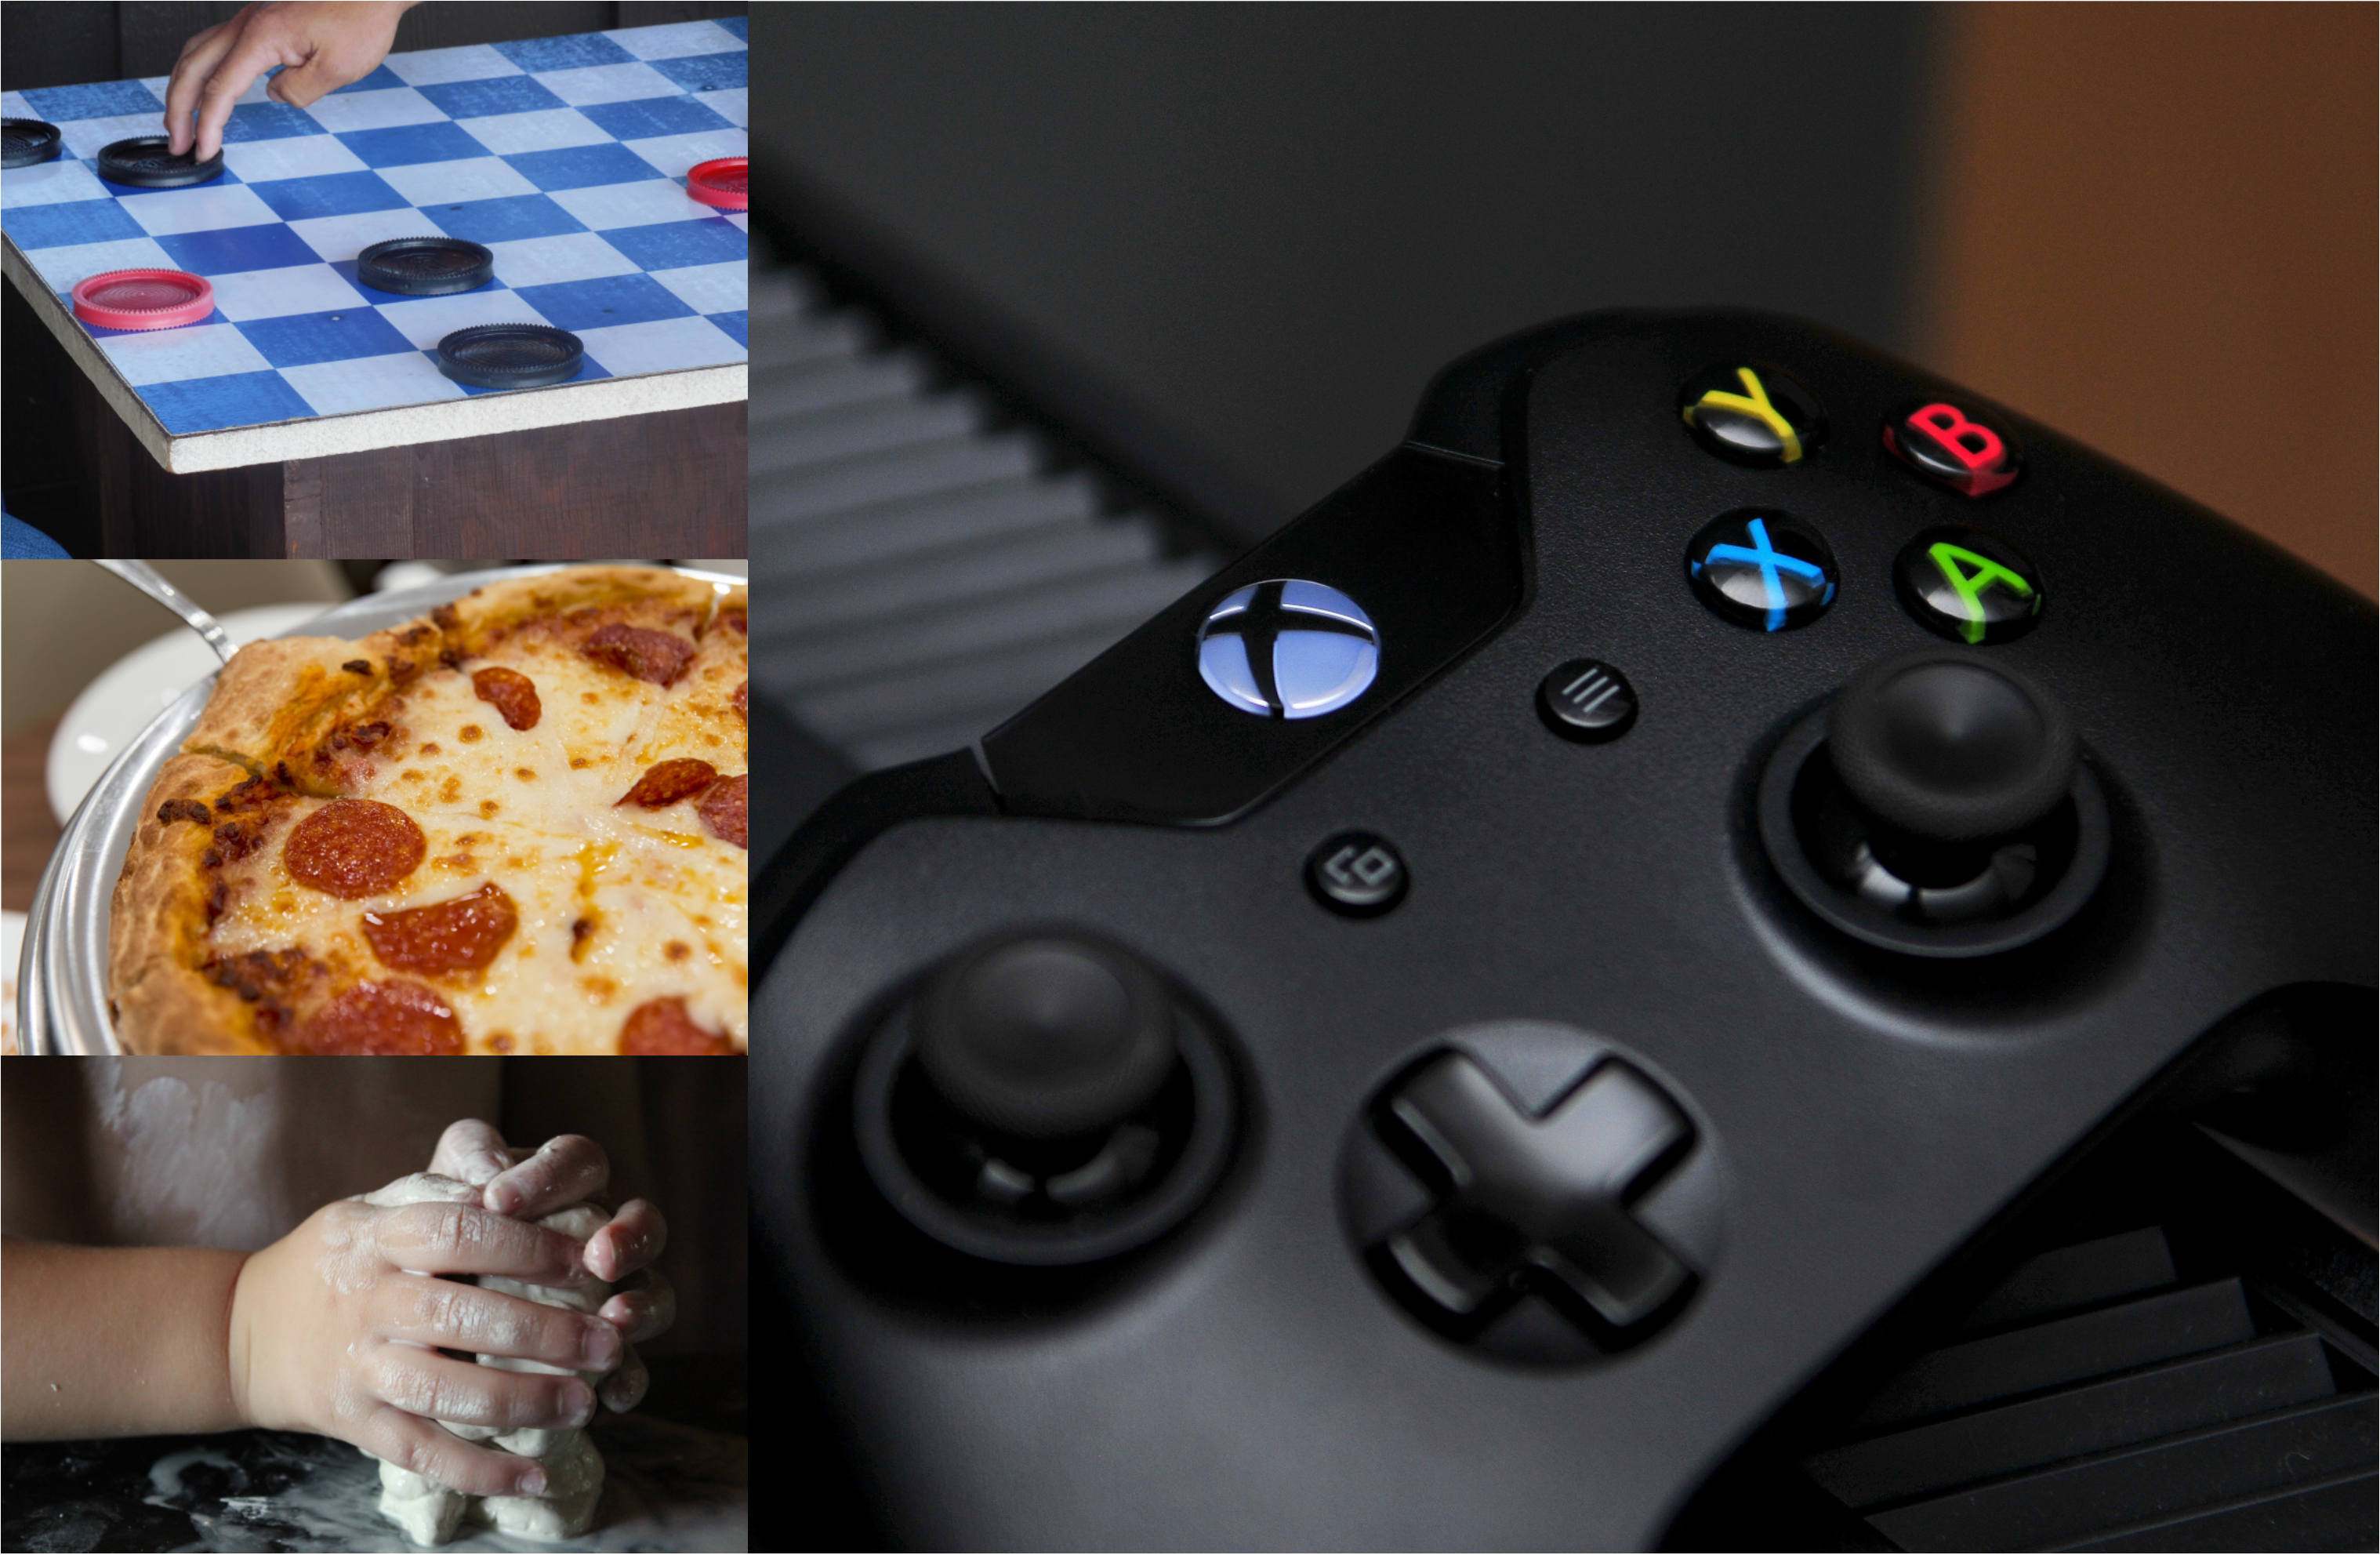 Collage of 4 images: Checker Board, Pizza, Hands working with Clay, and a Xbox controller.